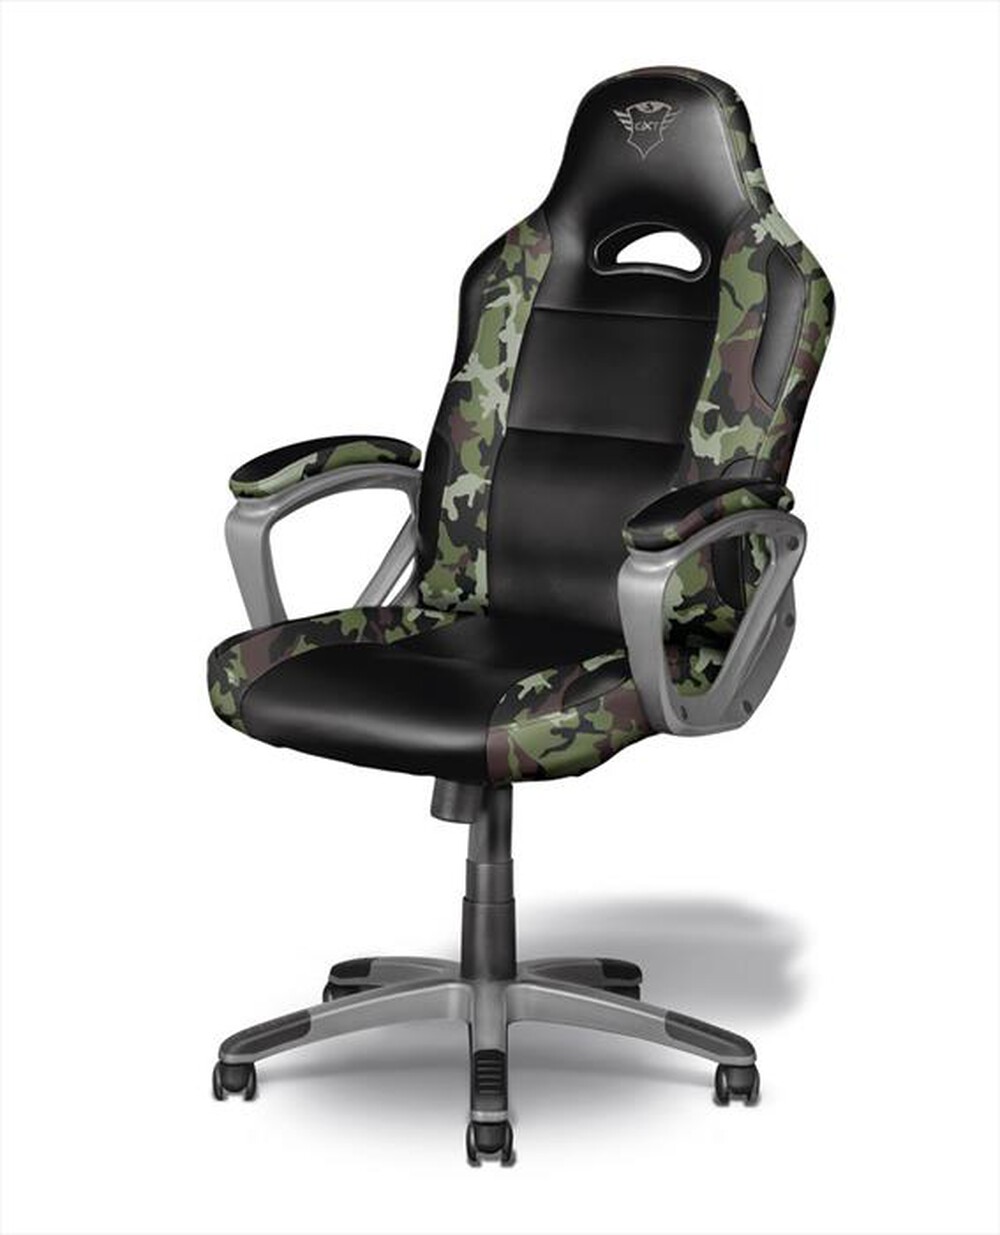 "TRUST - GXT705C RYON CHAIR CAMO-Camouflage"